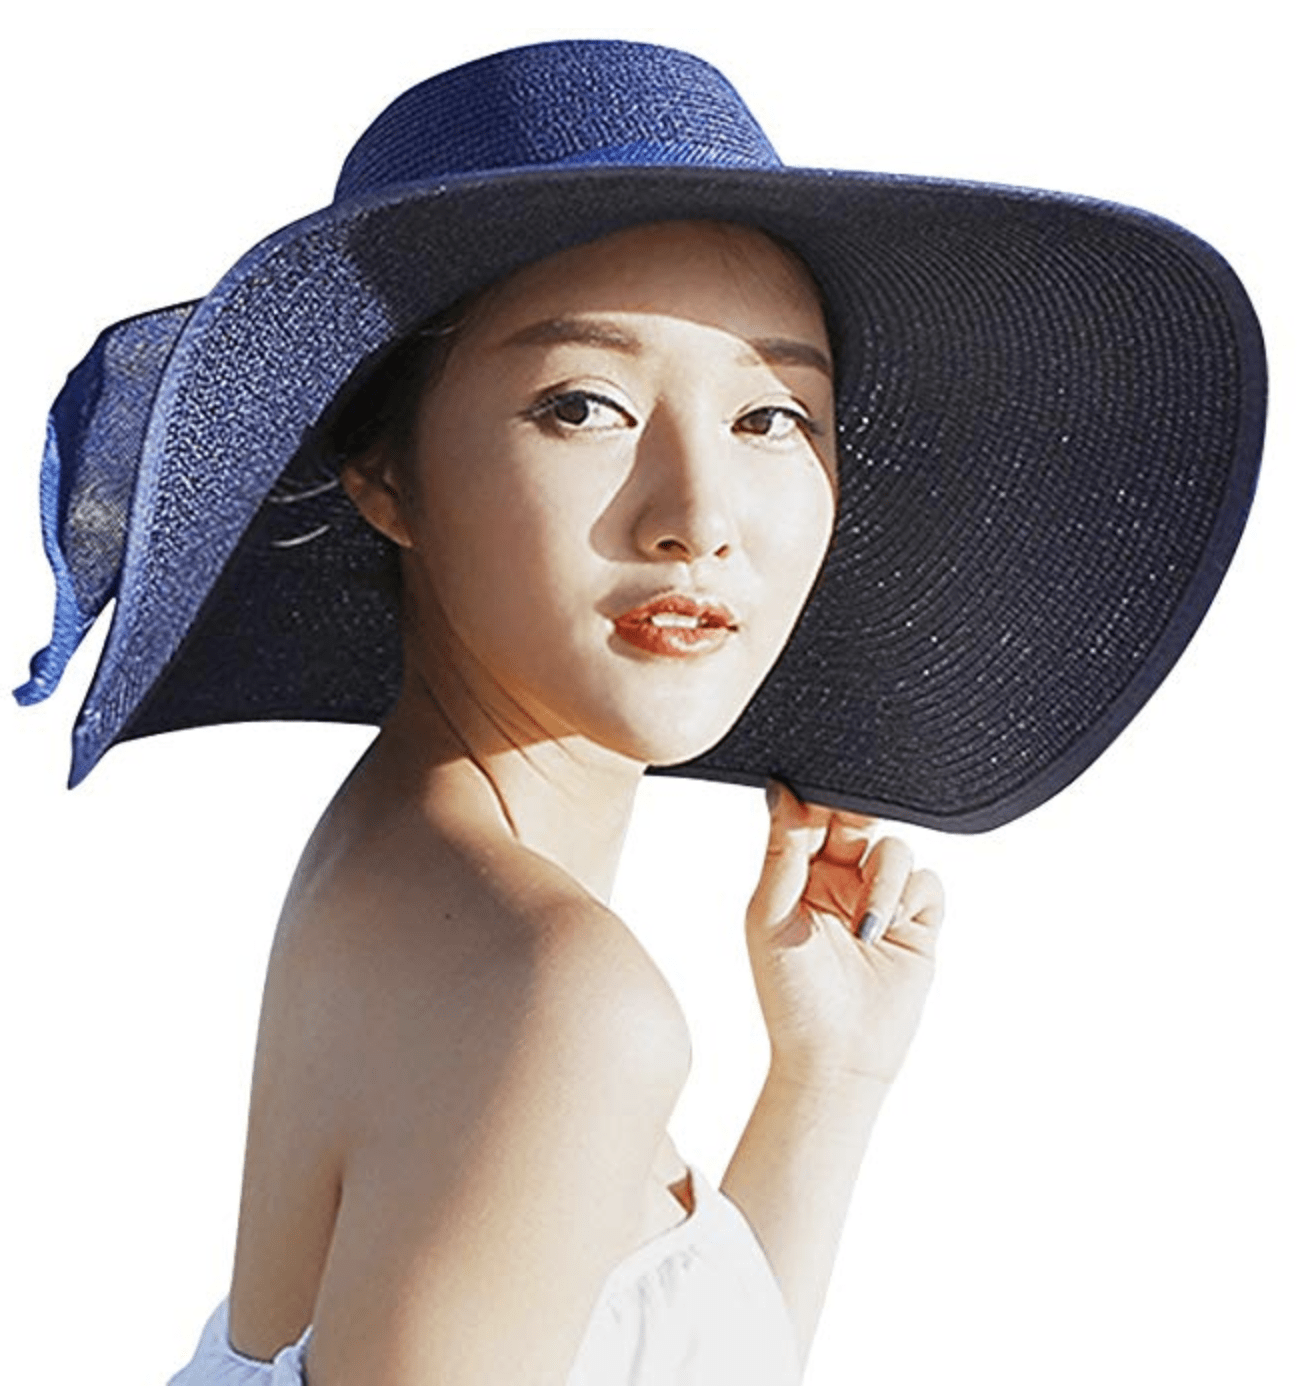 This $20 sun hat is going viral on Amazon - TODAY